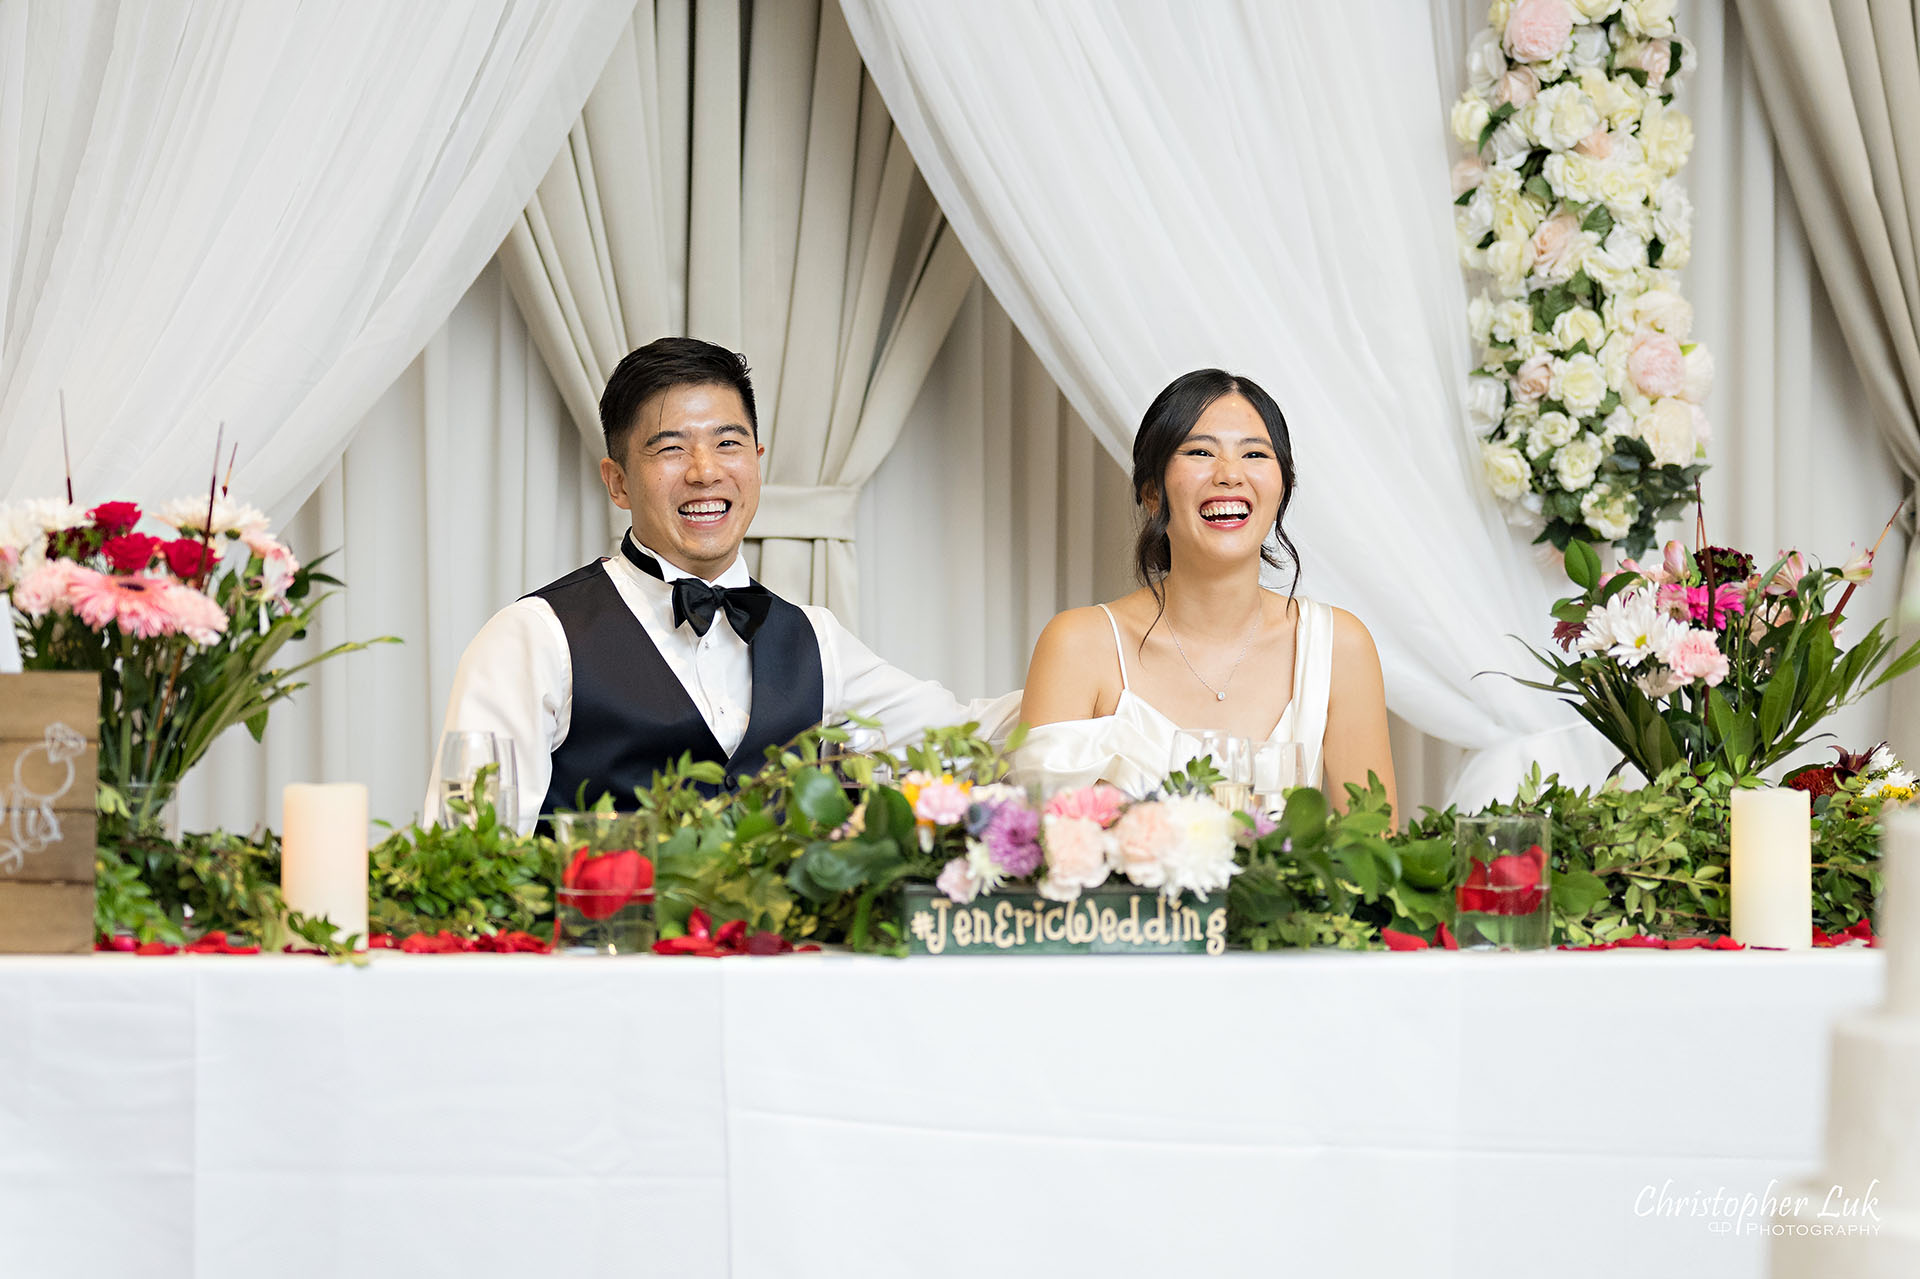 Crystal Fountain Event Venue Markham Wedding Dinner Reception Bride Groom Candid Natural Organic Photojournalistic Speeches Reaction Laughing Happy Smiling